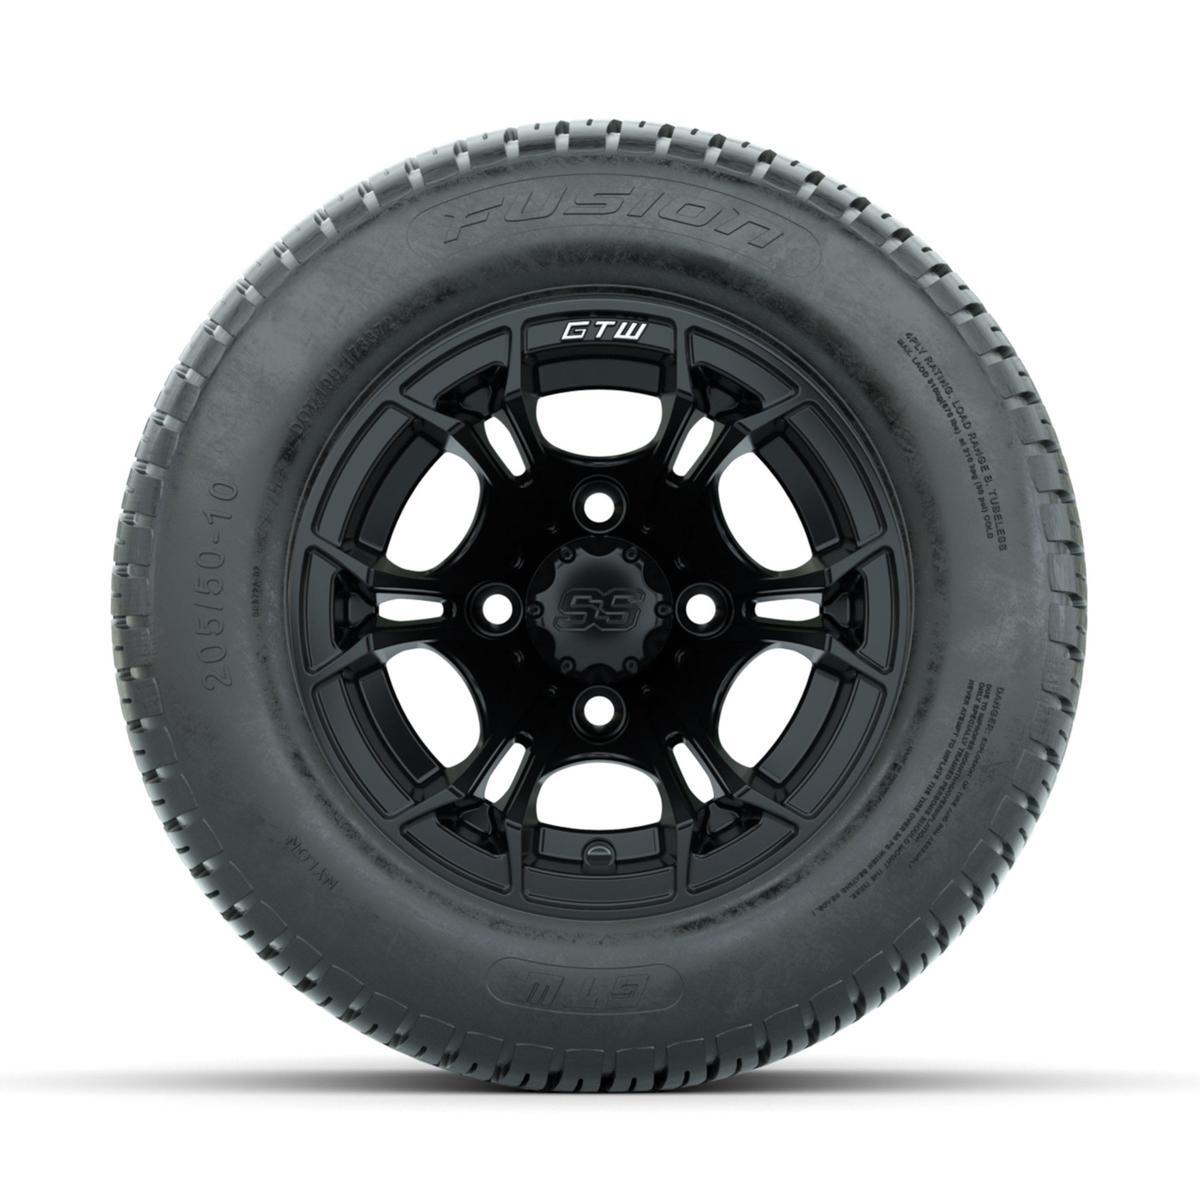 GTW Spyder Matte Black 10 in Wheels with 205/50-10 Fusion Street Tires – Full Set